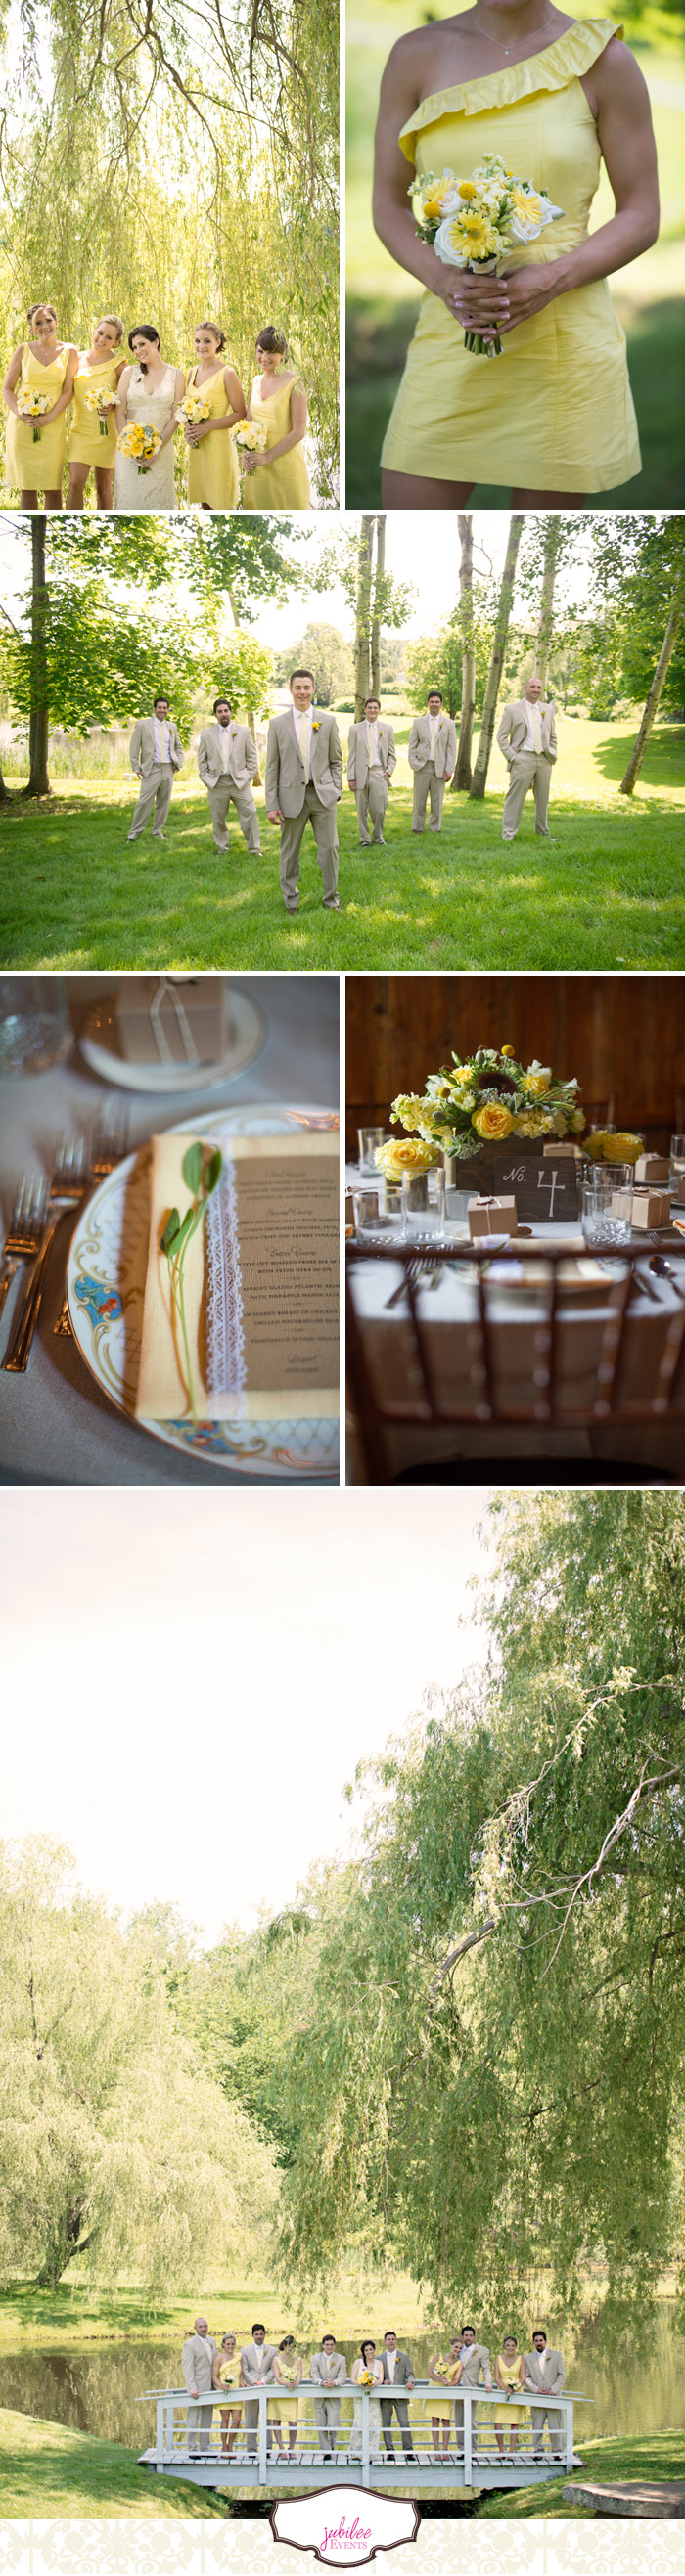 Rustic Connecticut Wedding at The Barns at Wesleyan Hills with yellow, green and gold details